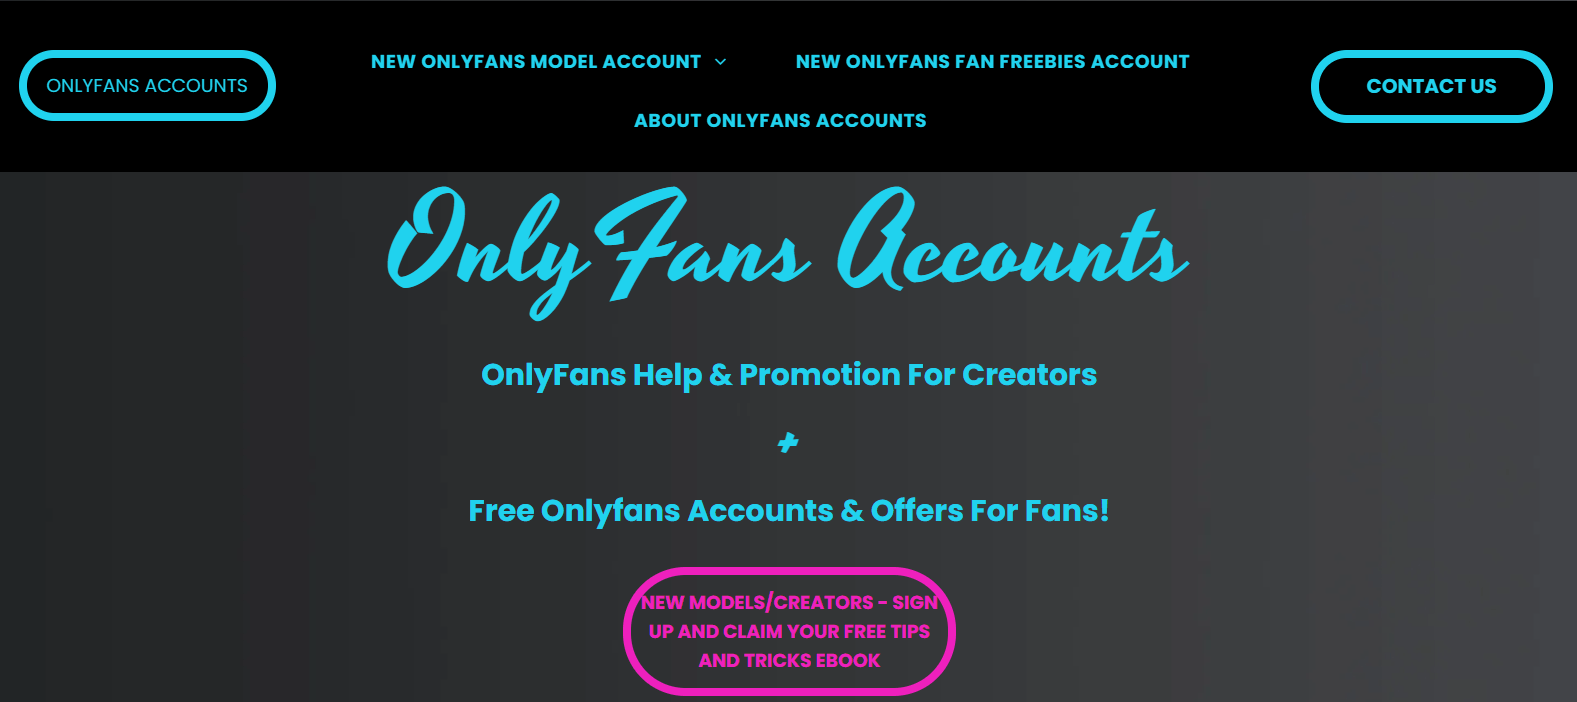 2022 free onlyfans account 